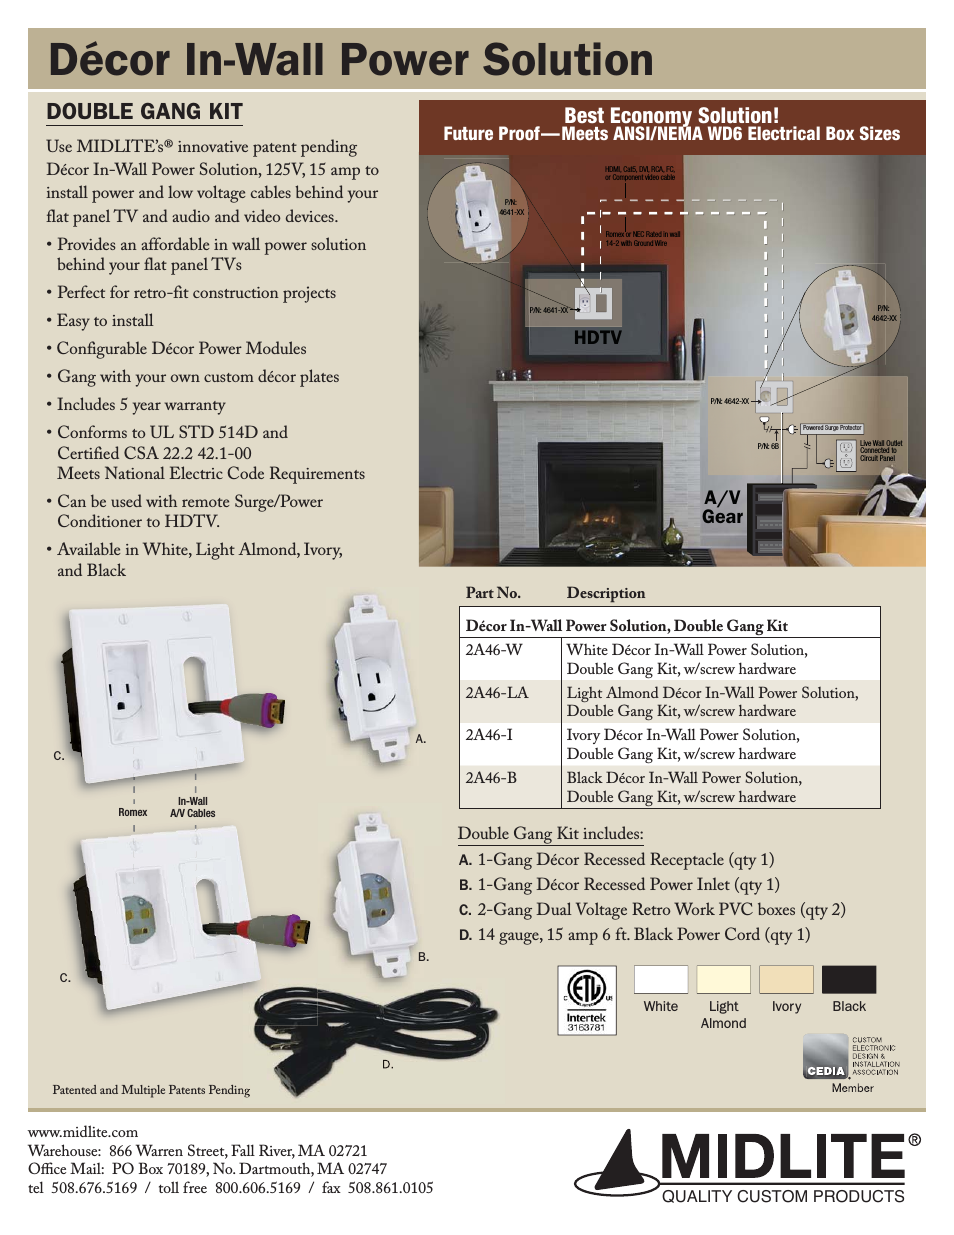 DOUBLE GANG DÉCOR IN-WALL POWER SOLUTION KIT WITH 6 FT CORD